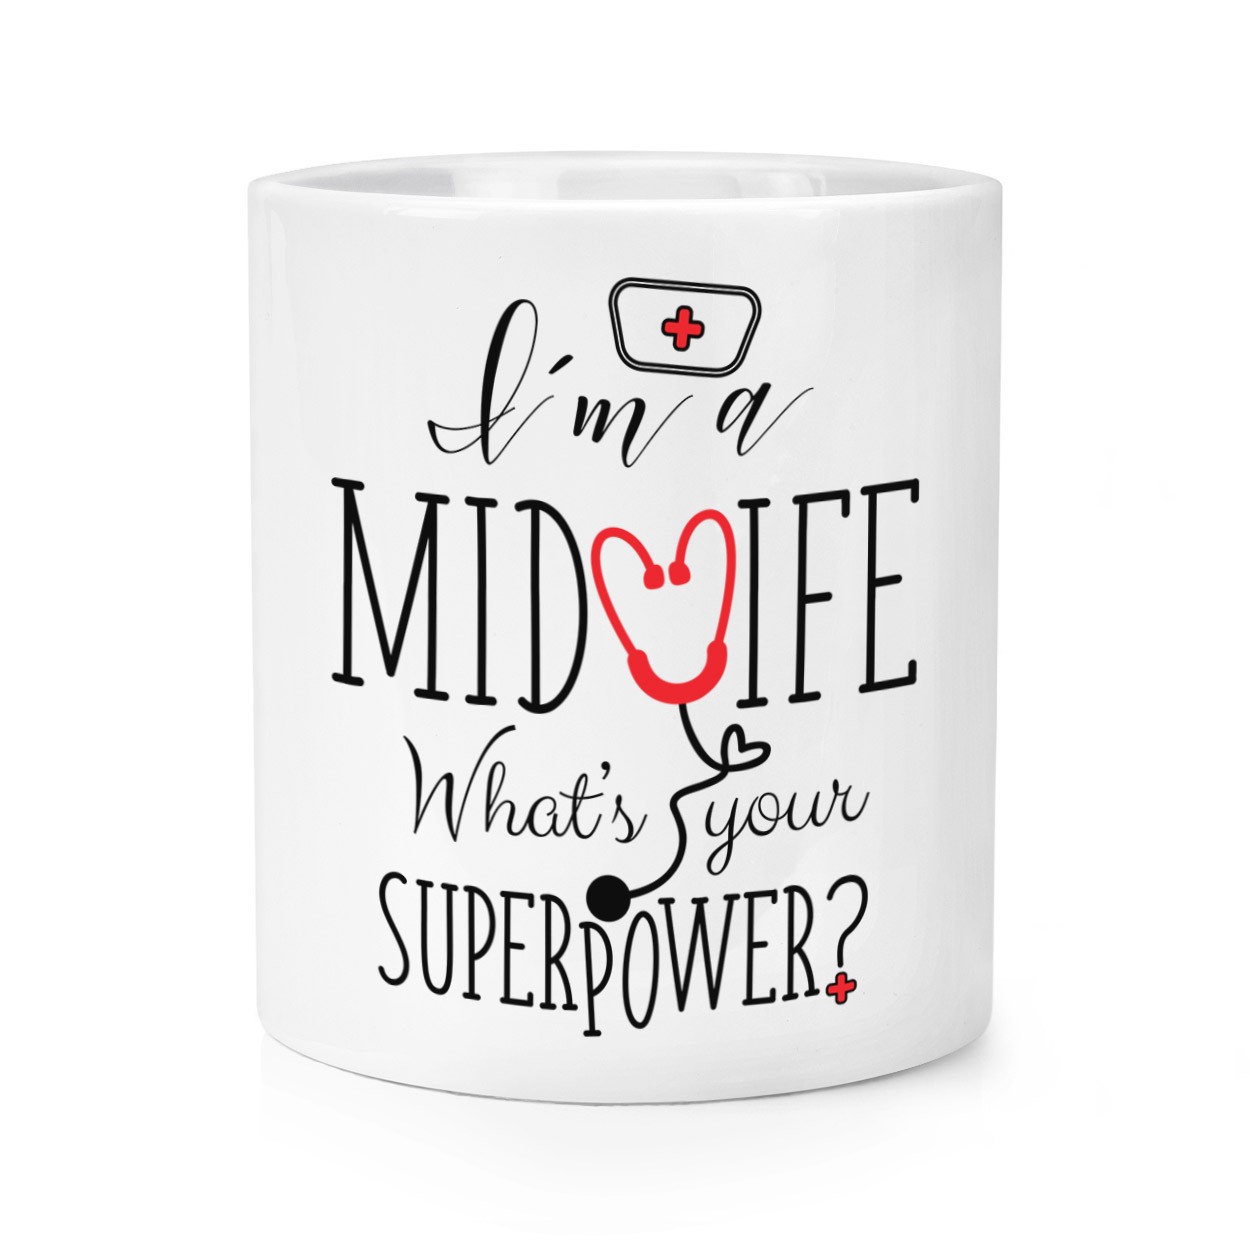 I'm A Midwife What's Your Superpower Makeup Brush Pencil Pot